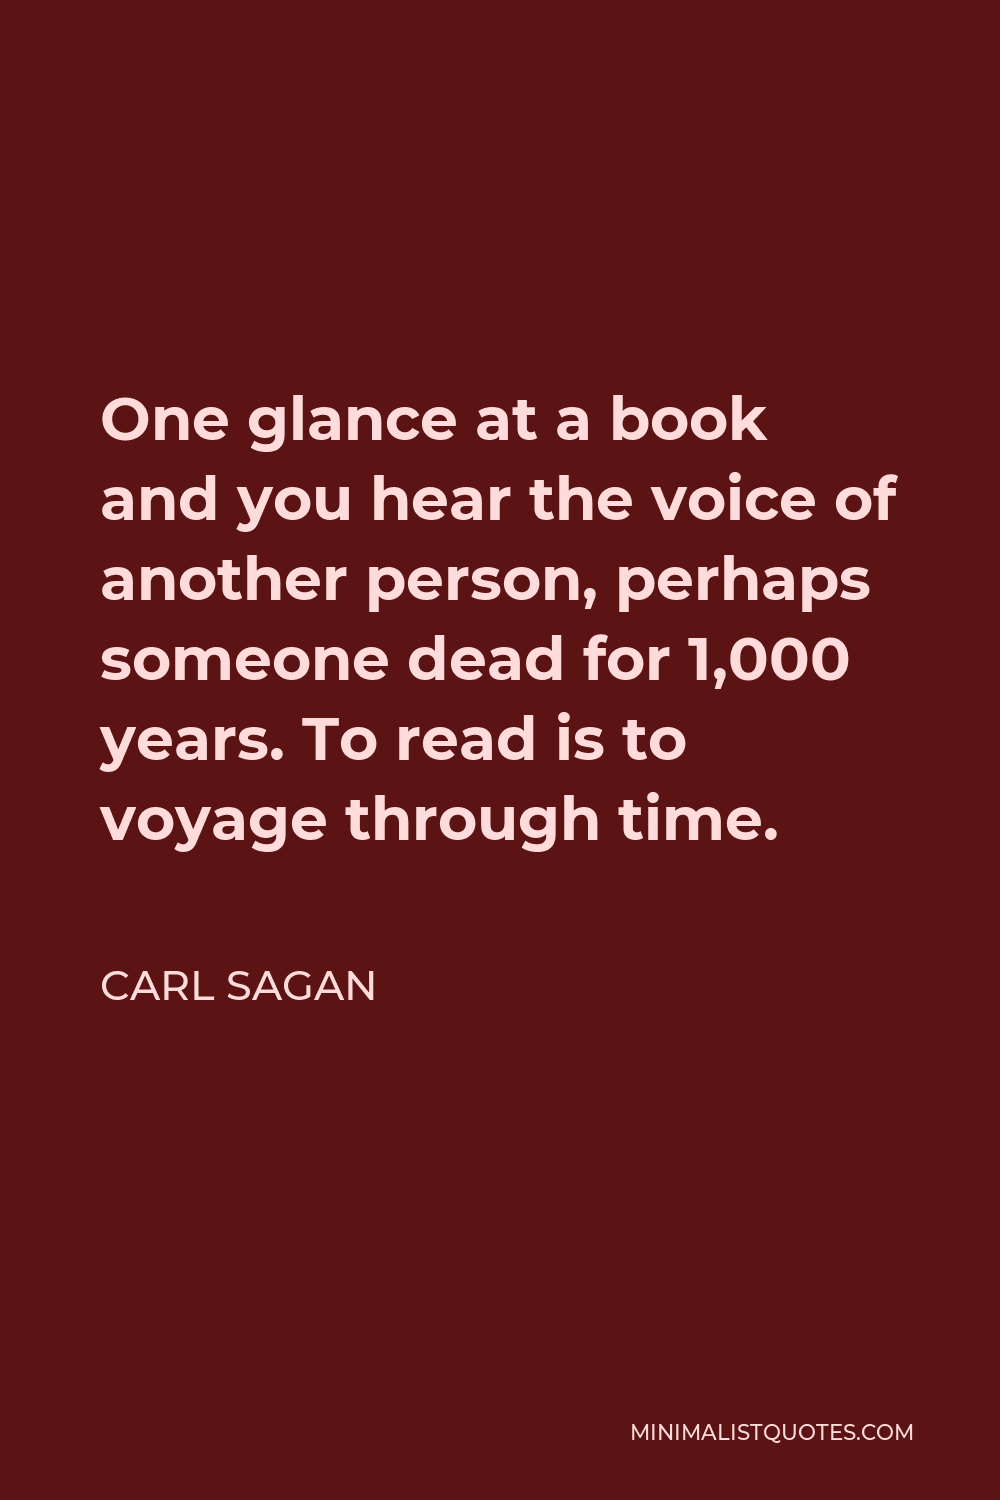 Carl Sagan Quote: One glance at a book and you hear the voice of ...